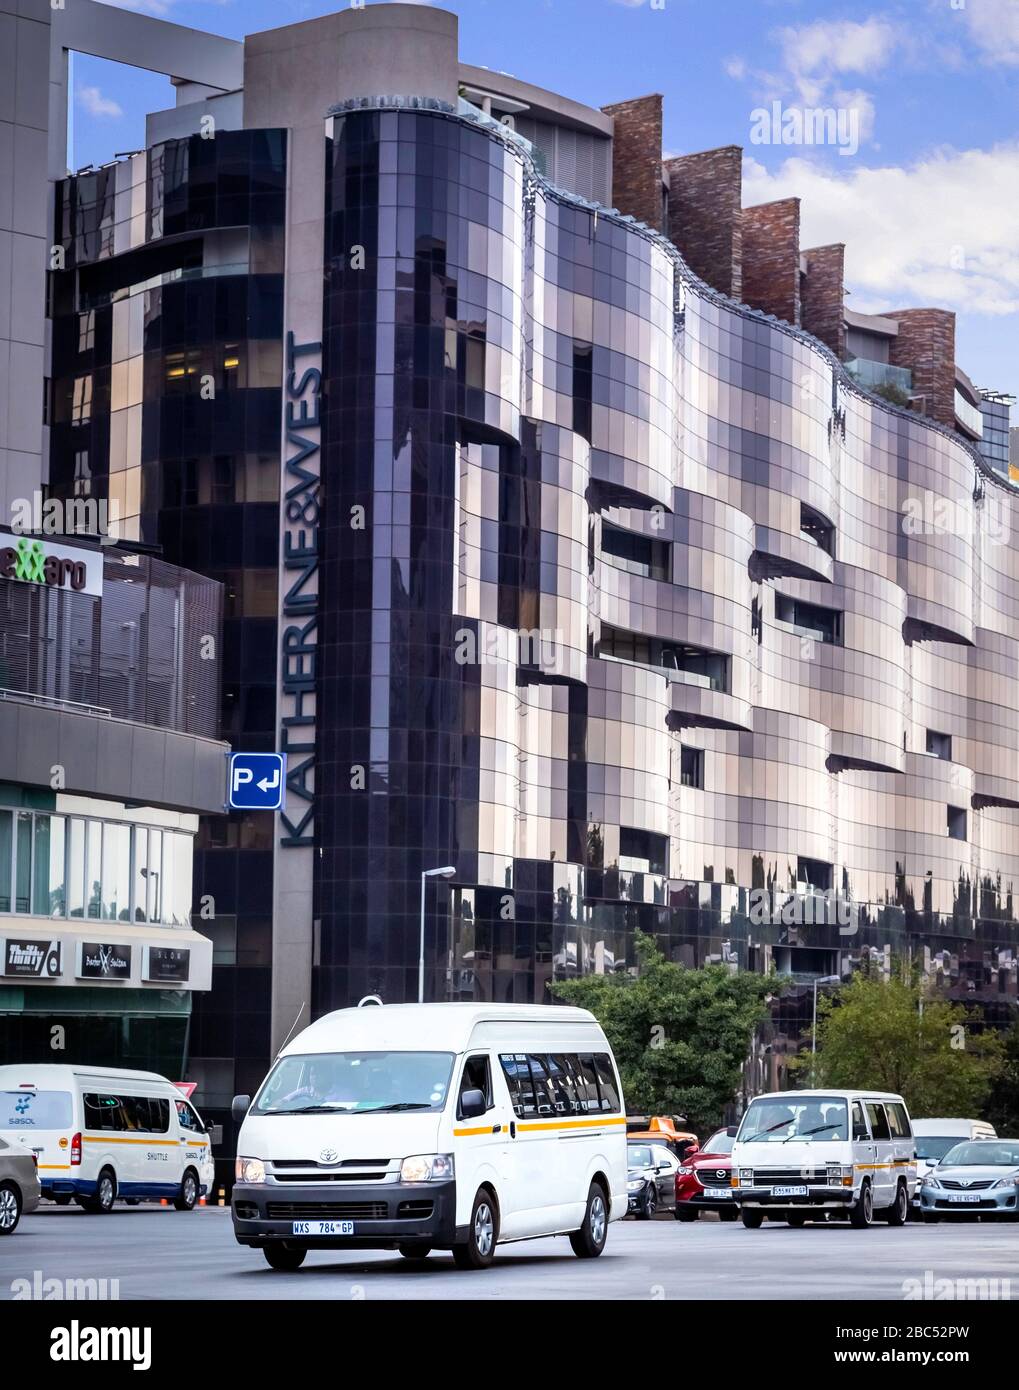 Johannesburg, South Africa 18th February - 2020: Minibus taxis passing by modern corporate office buildings. Stock Photo